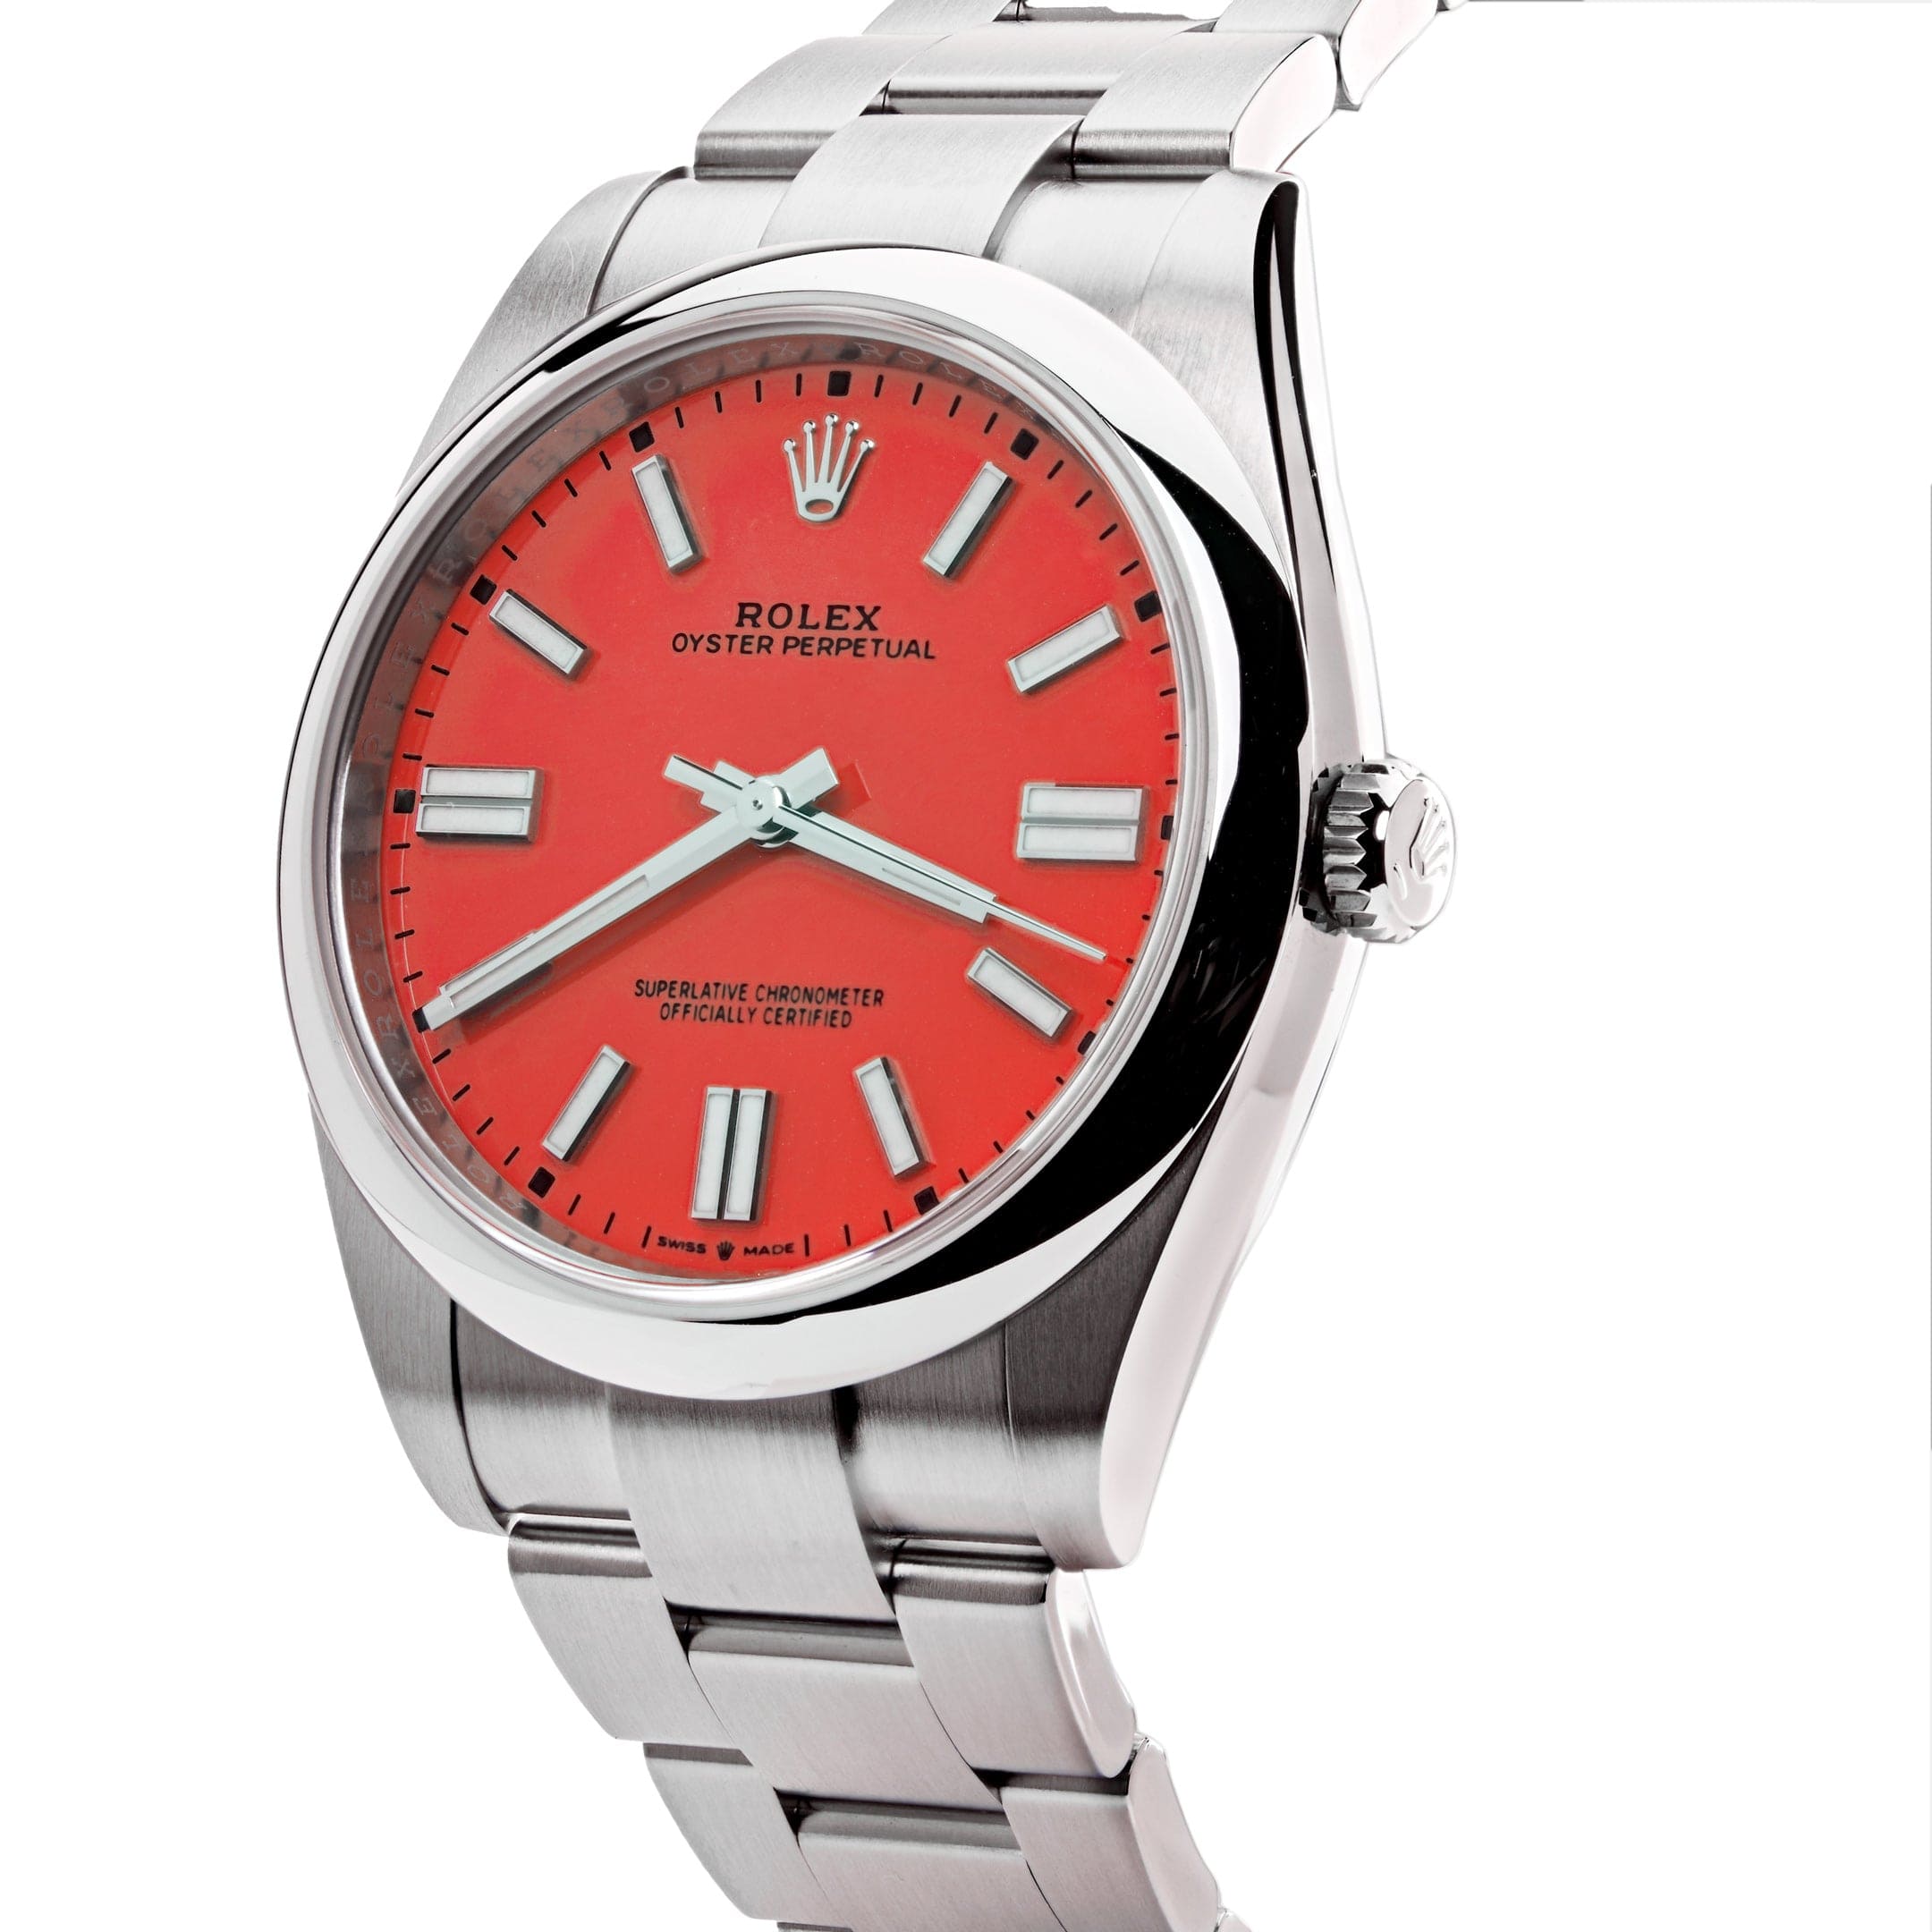 Rolex Oyster Perpetual 124300 Domed Bezel Red Dial